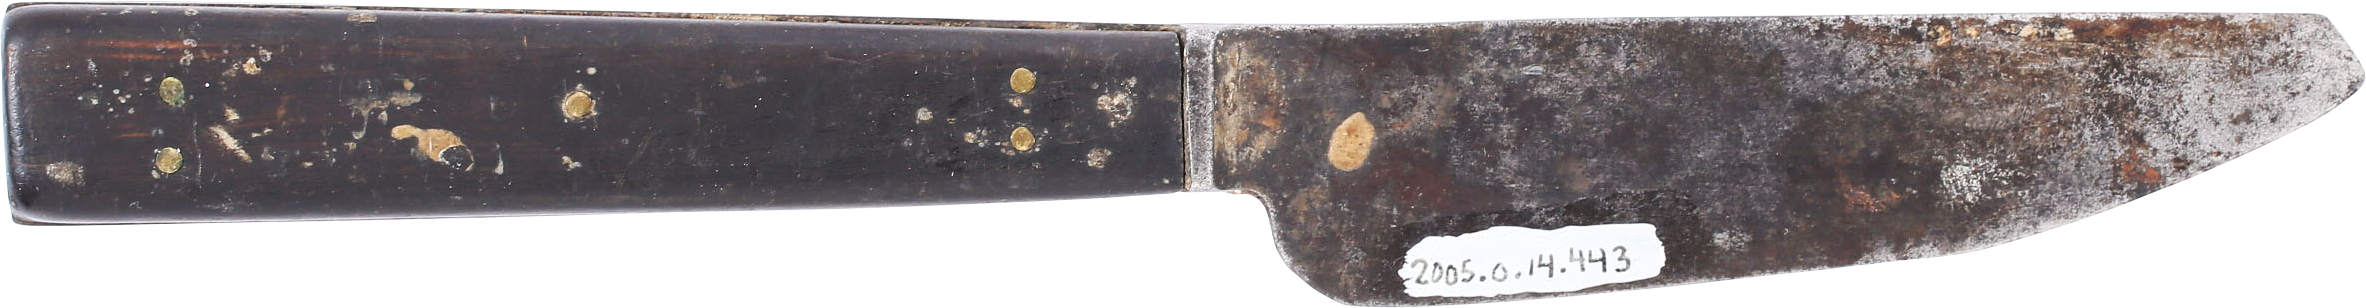 CONFEDERATE POUCH KNIFE - Fagan Arms